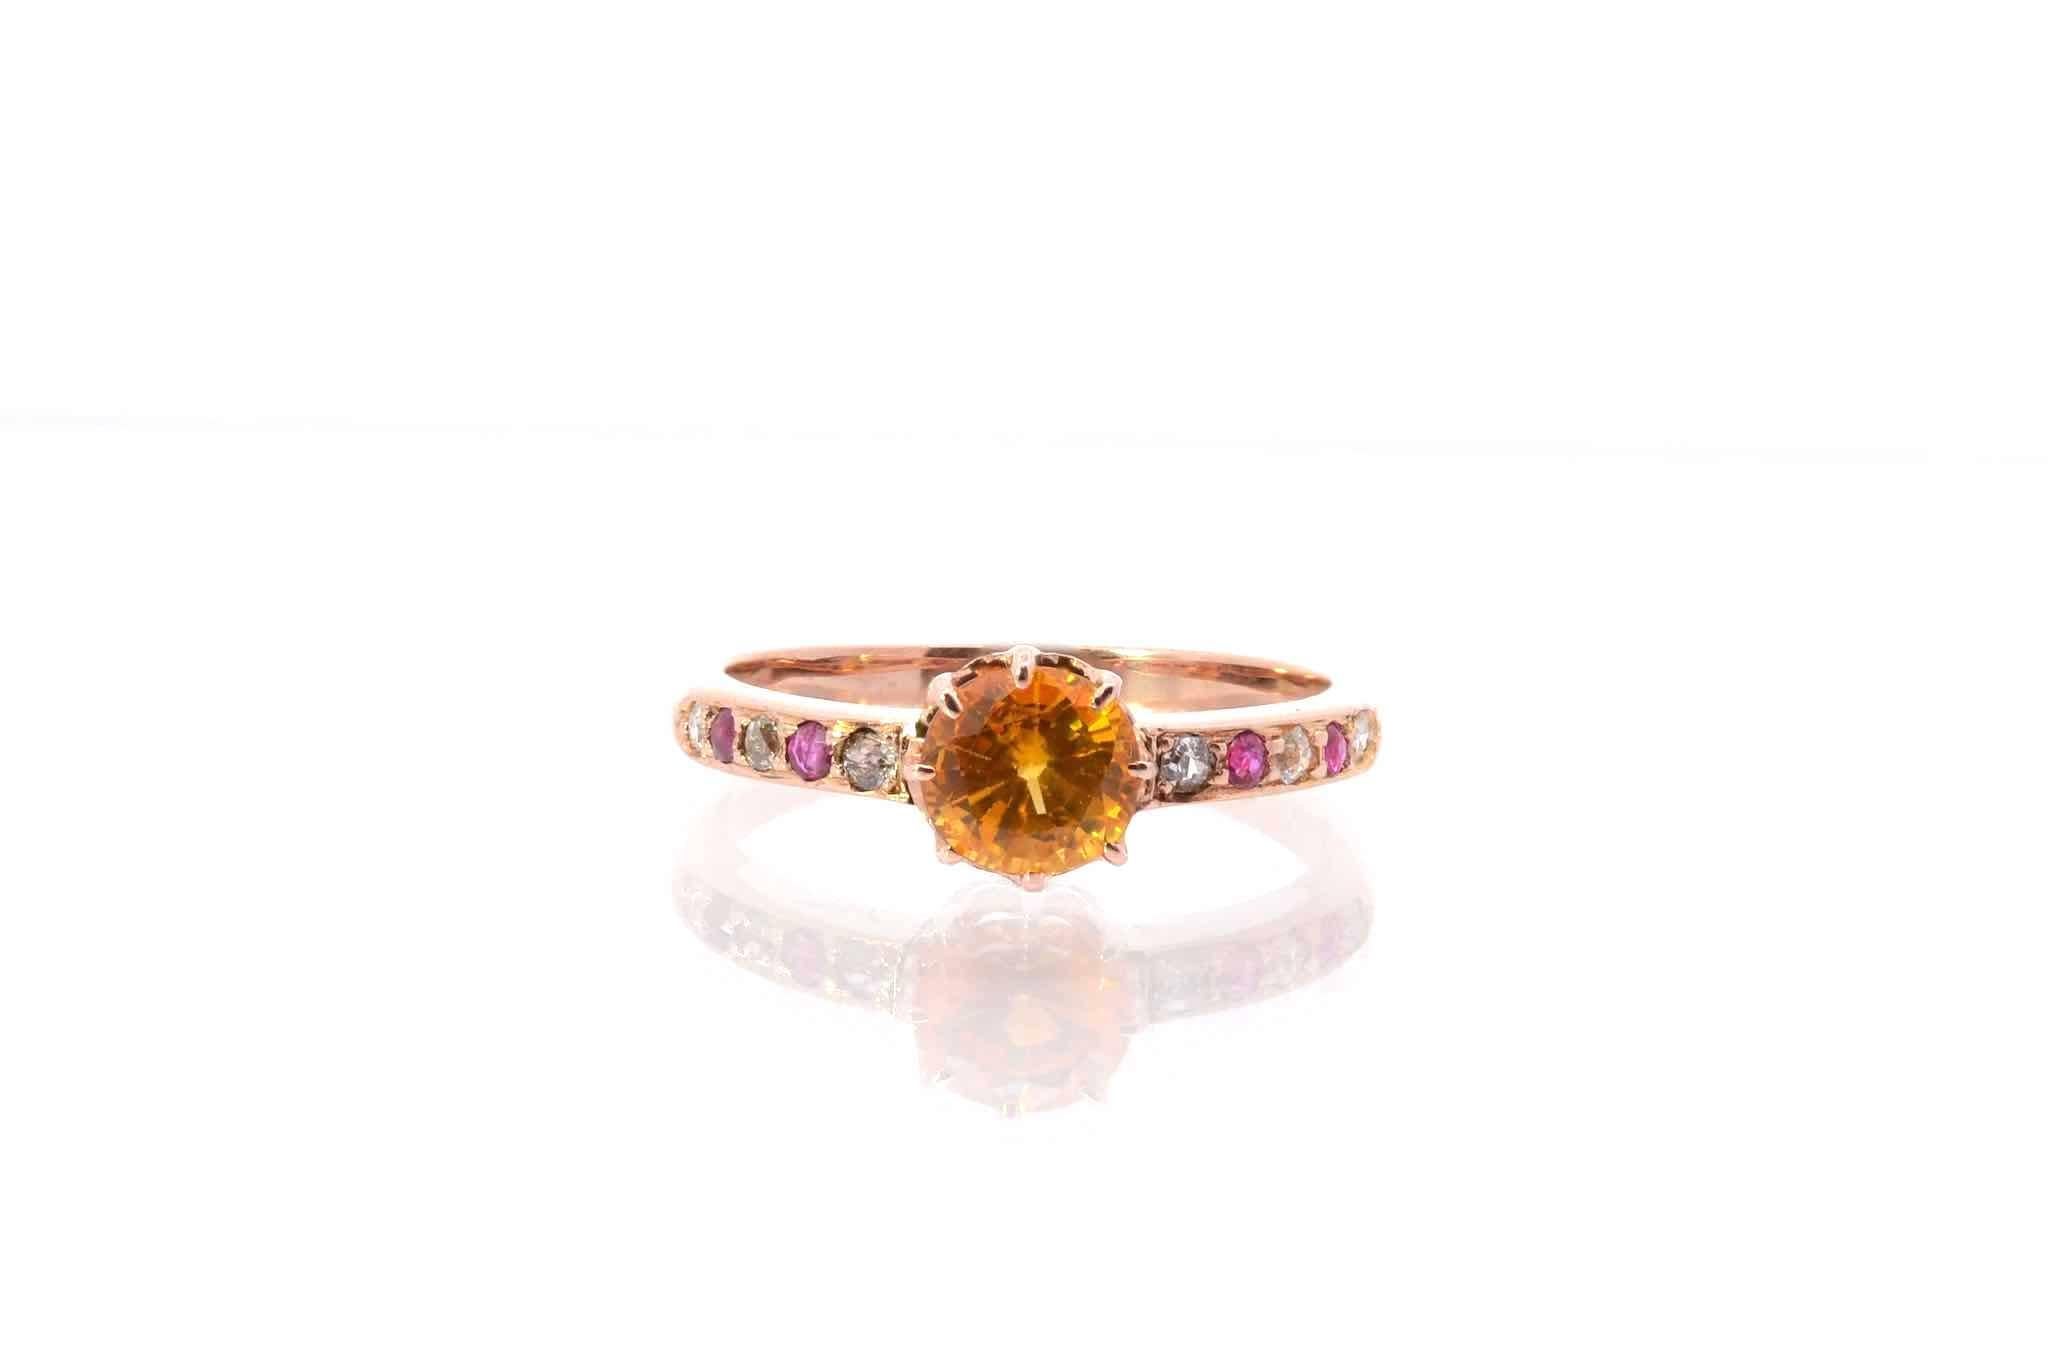 Stones: Yellow sapphire of 1.01 cts, 6 diamonds of 0.20 ct and 4 pink sapphires of 0.15 ct.
Material: 18k yellow gold
Weight: 2.8g
Period: 1900
Size: 53 (free sizing)
Certificate
Ref. : 24971b